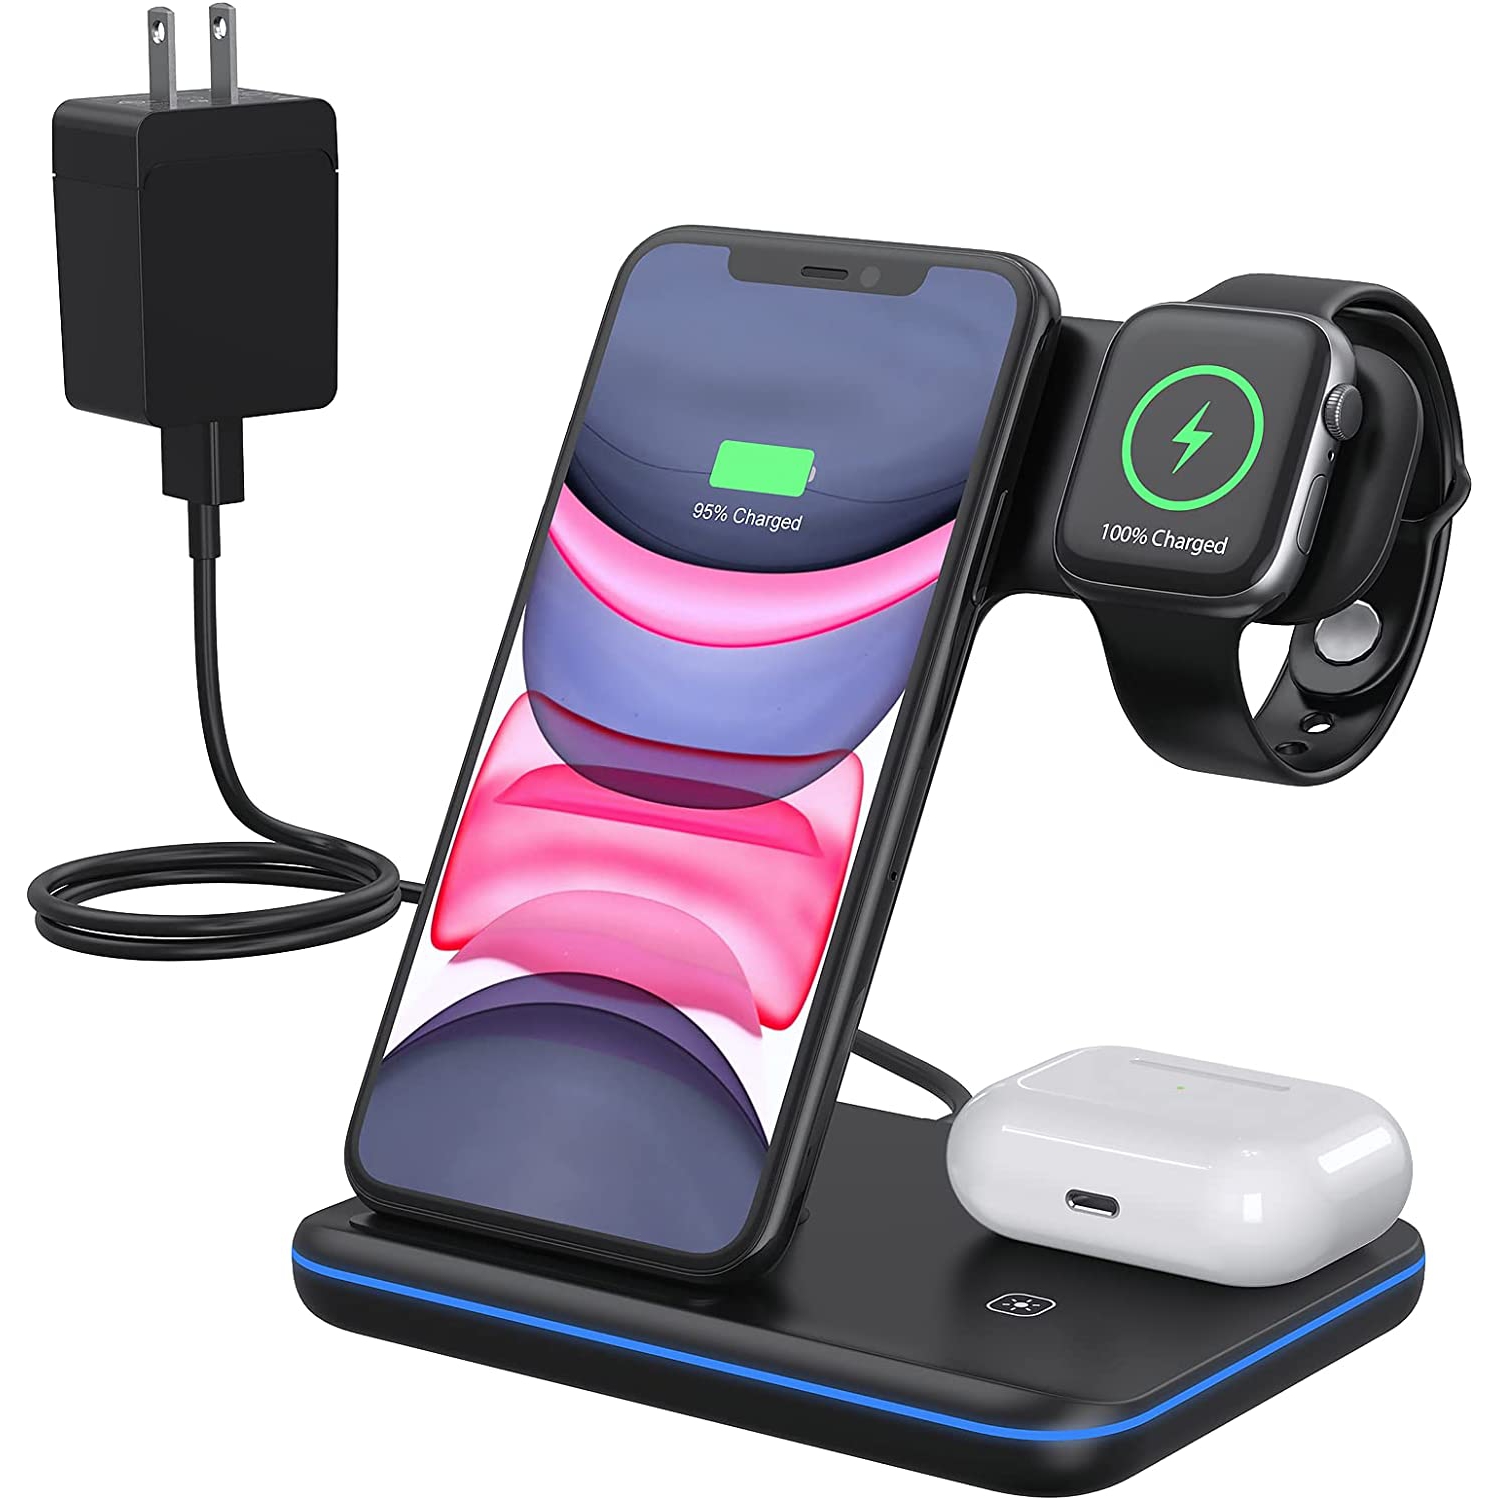 iPhone Wireless Charger Stand,3 in 1 Fast Charging Station,Wireless Charging Dock for Apple iPhone 13/12/11/11pro/11pro Max/X/XS/XR/Xs Max/8/8 Plus, Samsung,Apple Watch Series, Air